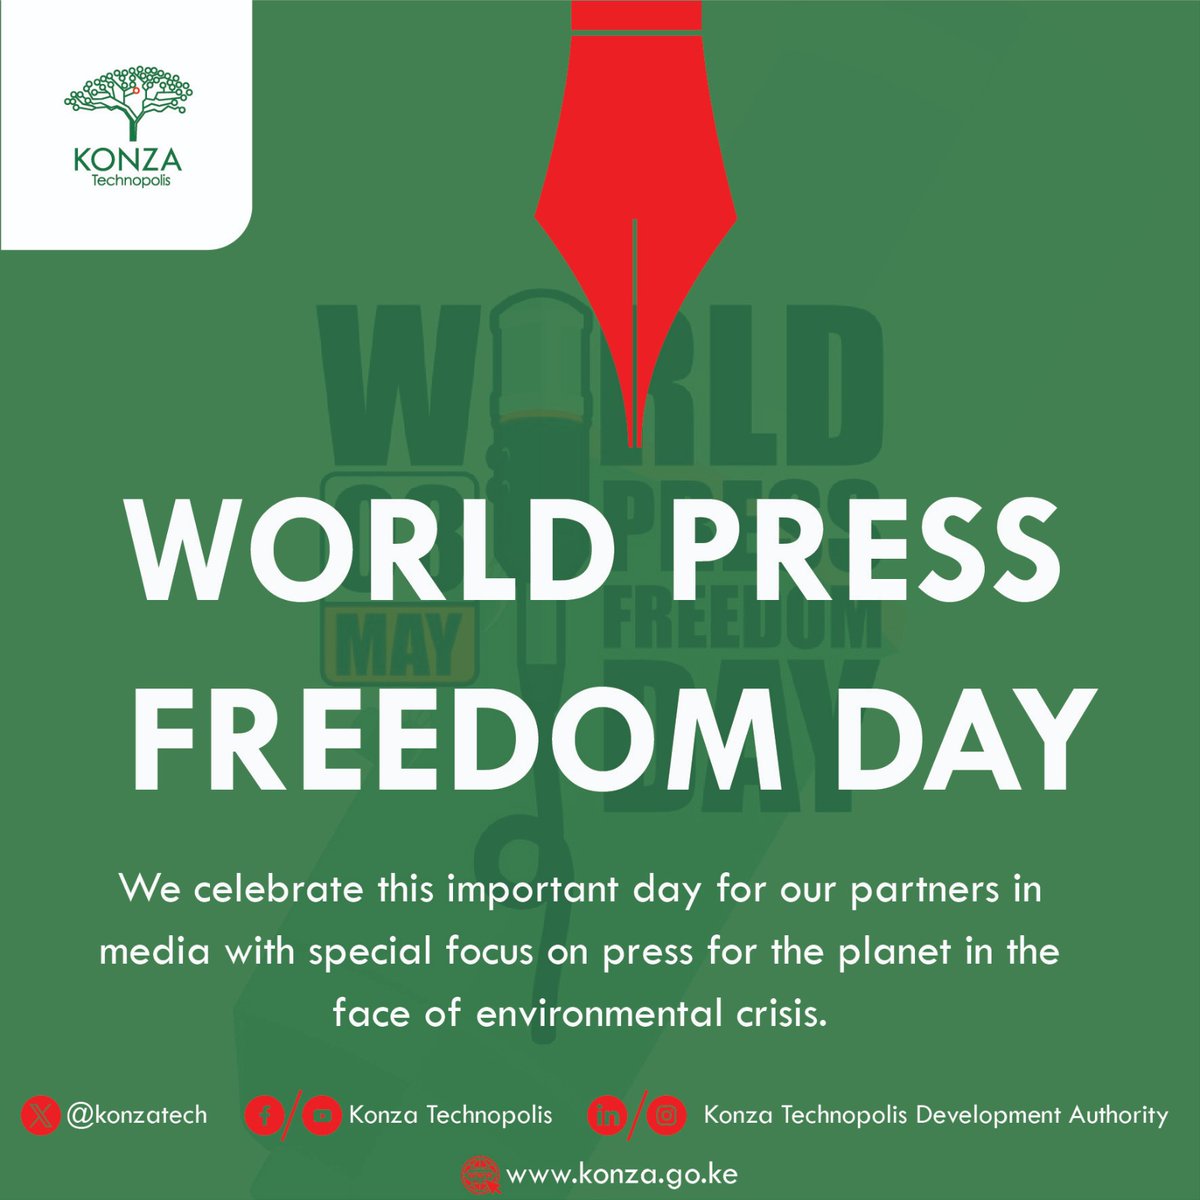 Happy World Press Freedom Day! We celebrate the role of #pressfreedom in promoting transparency and accountability through increased freedom of expression. Press freedom also empowers citizens across the world by enhancing their access to wide range of news and information.